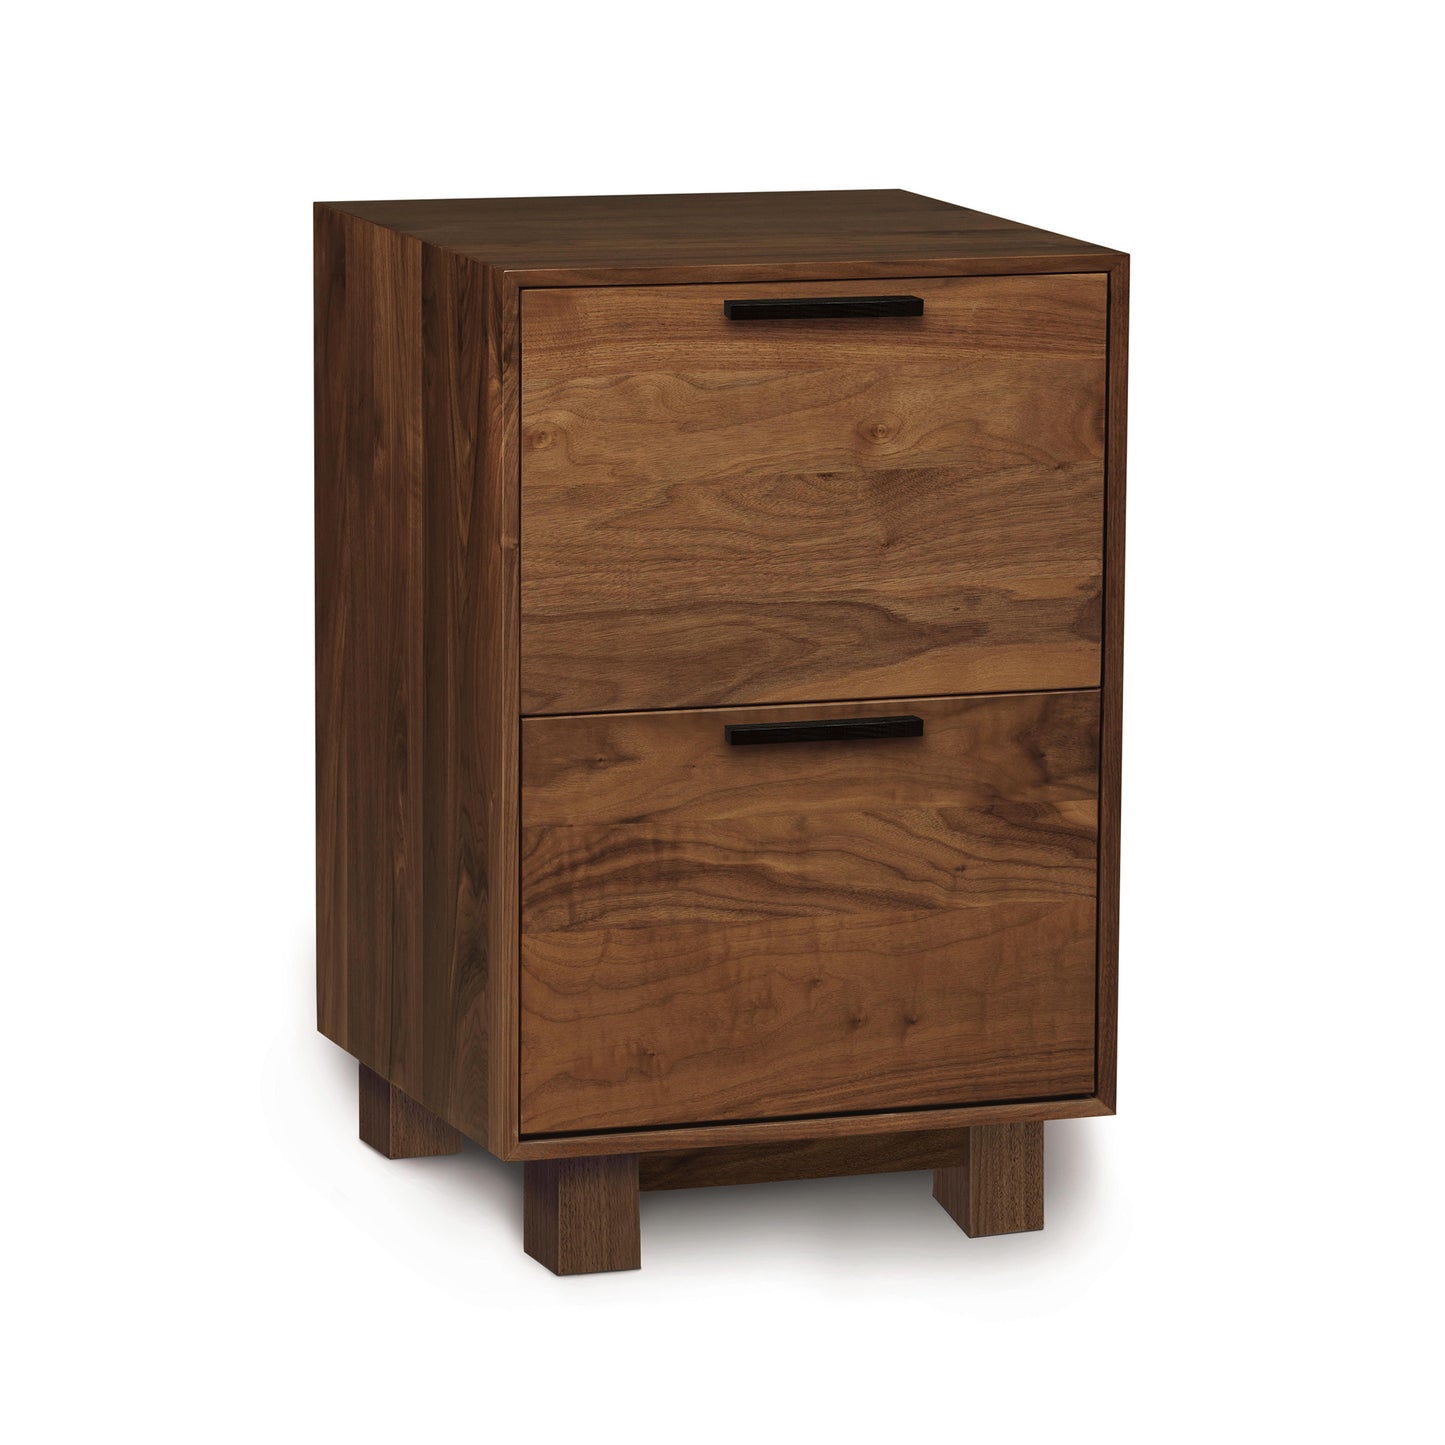 A Copeland Furniture Linear Narrow File Cabinet with two drawers, sustainably sourced from North American hardwoods, against a white background.